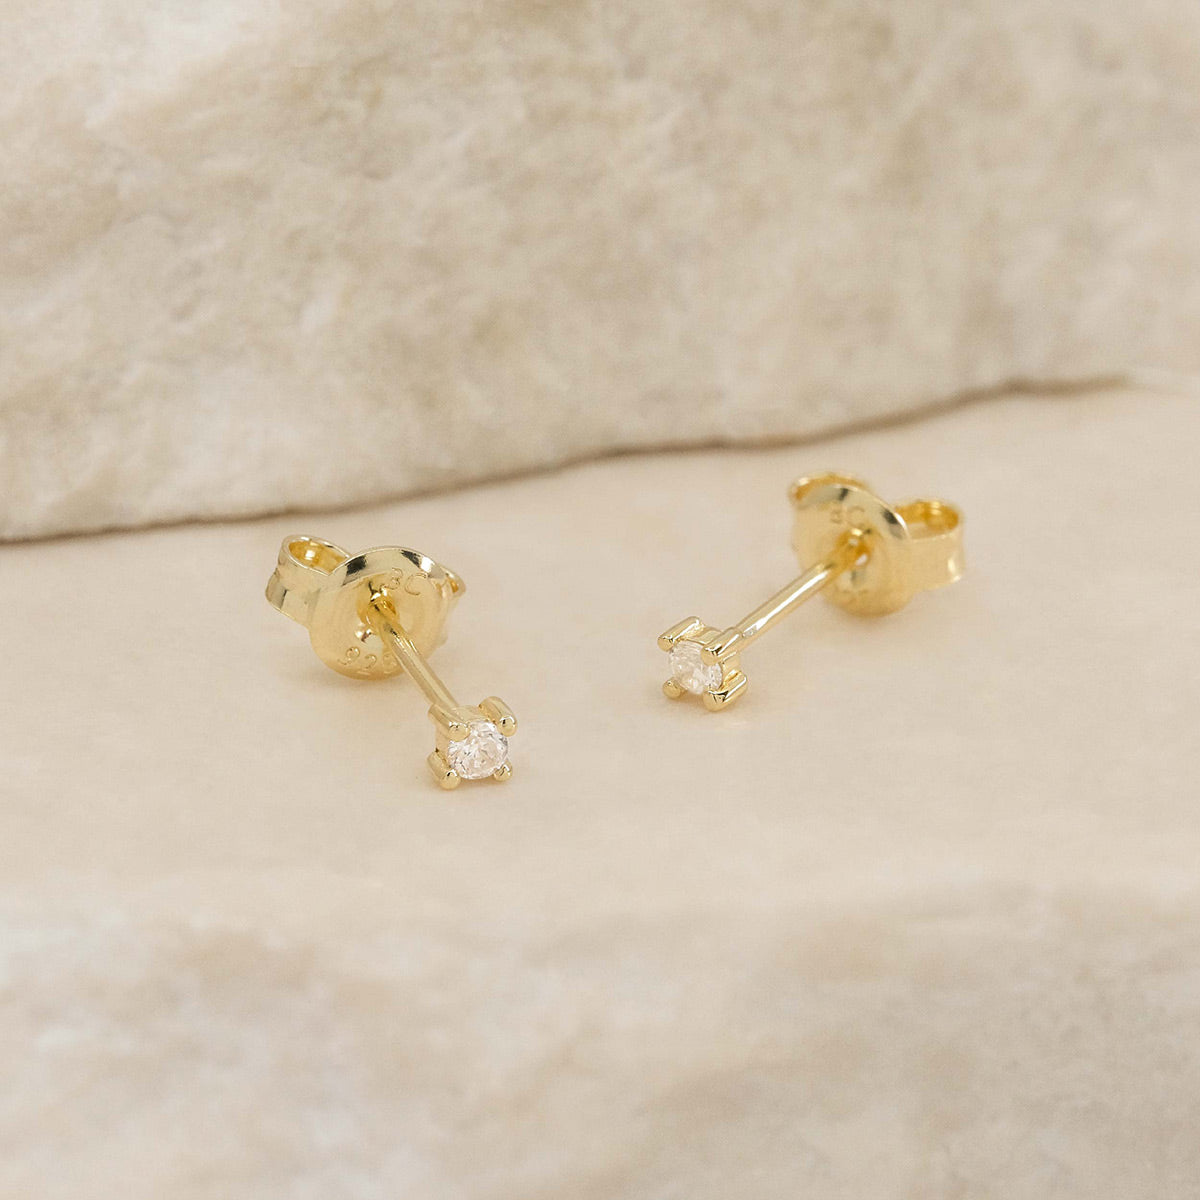 By Charlotte Pure Light Stud Earrings, Gold or Silver